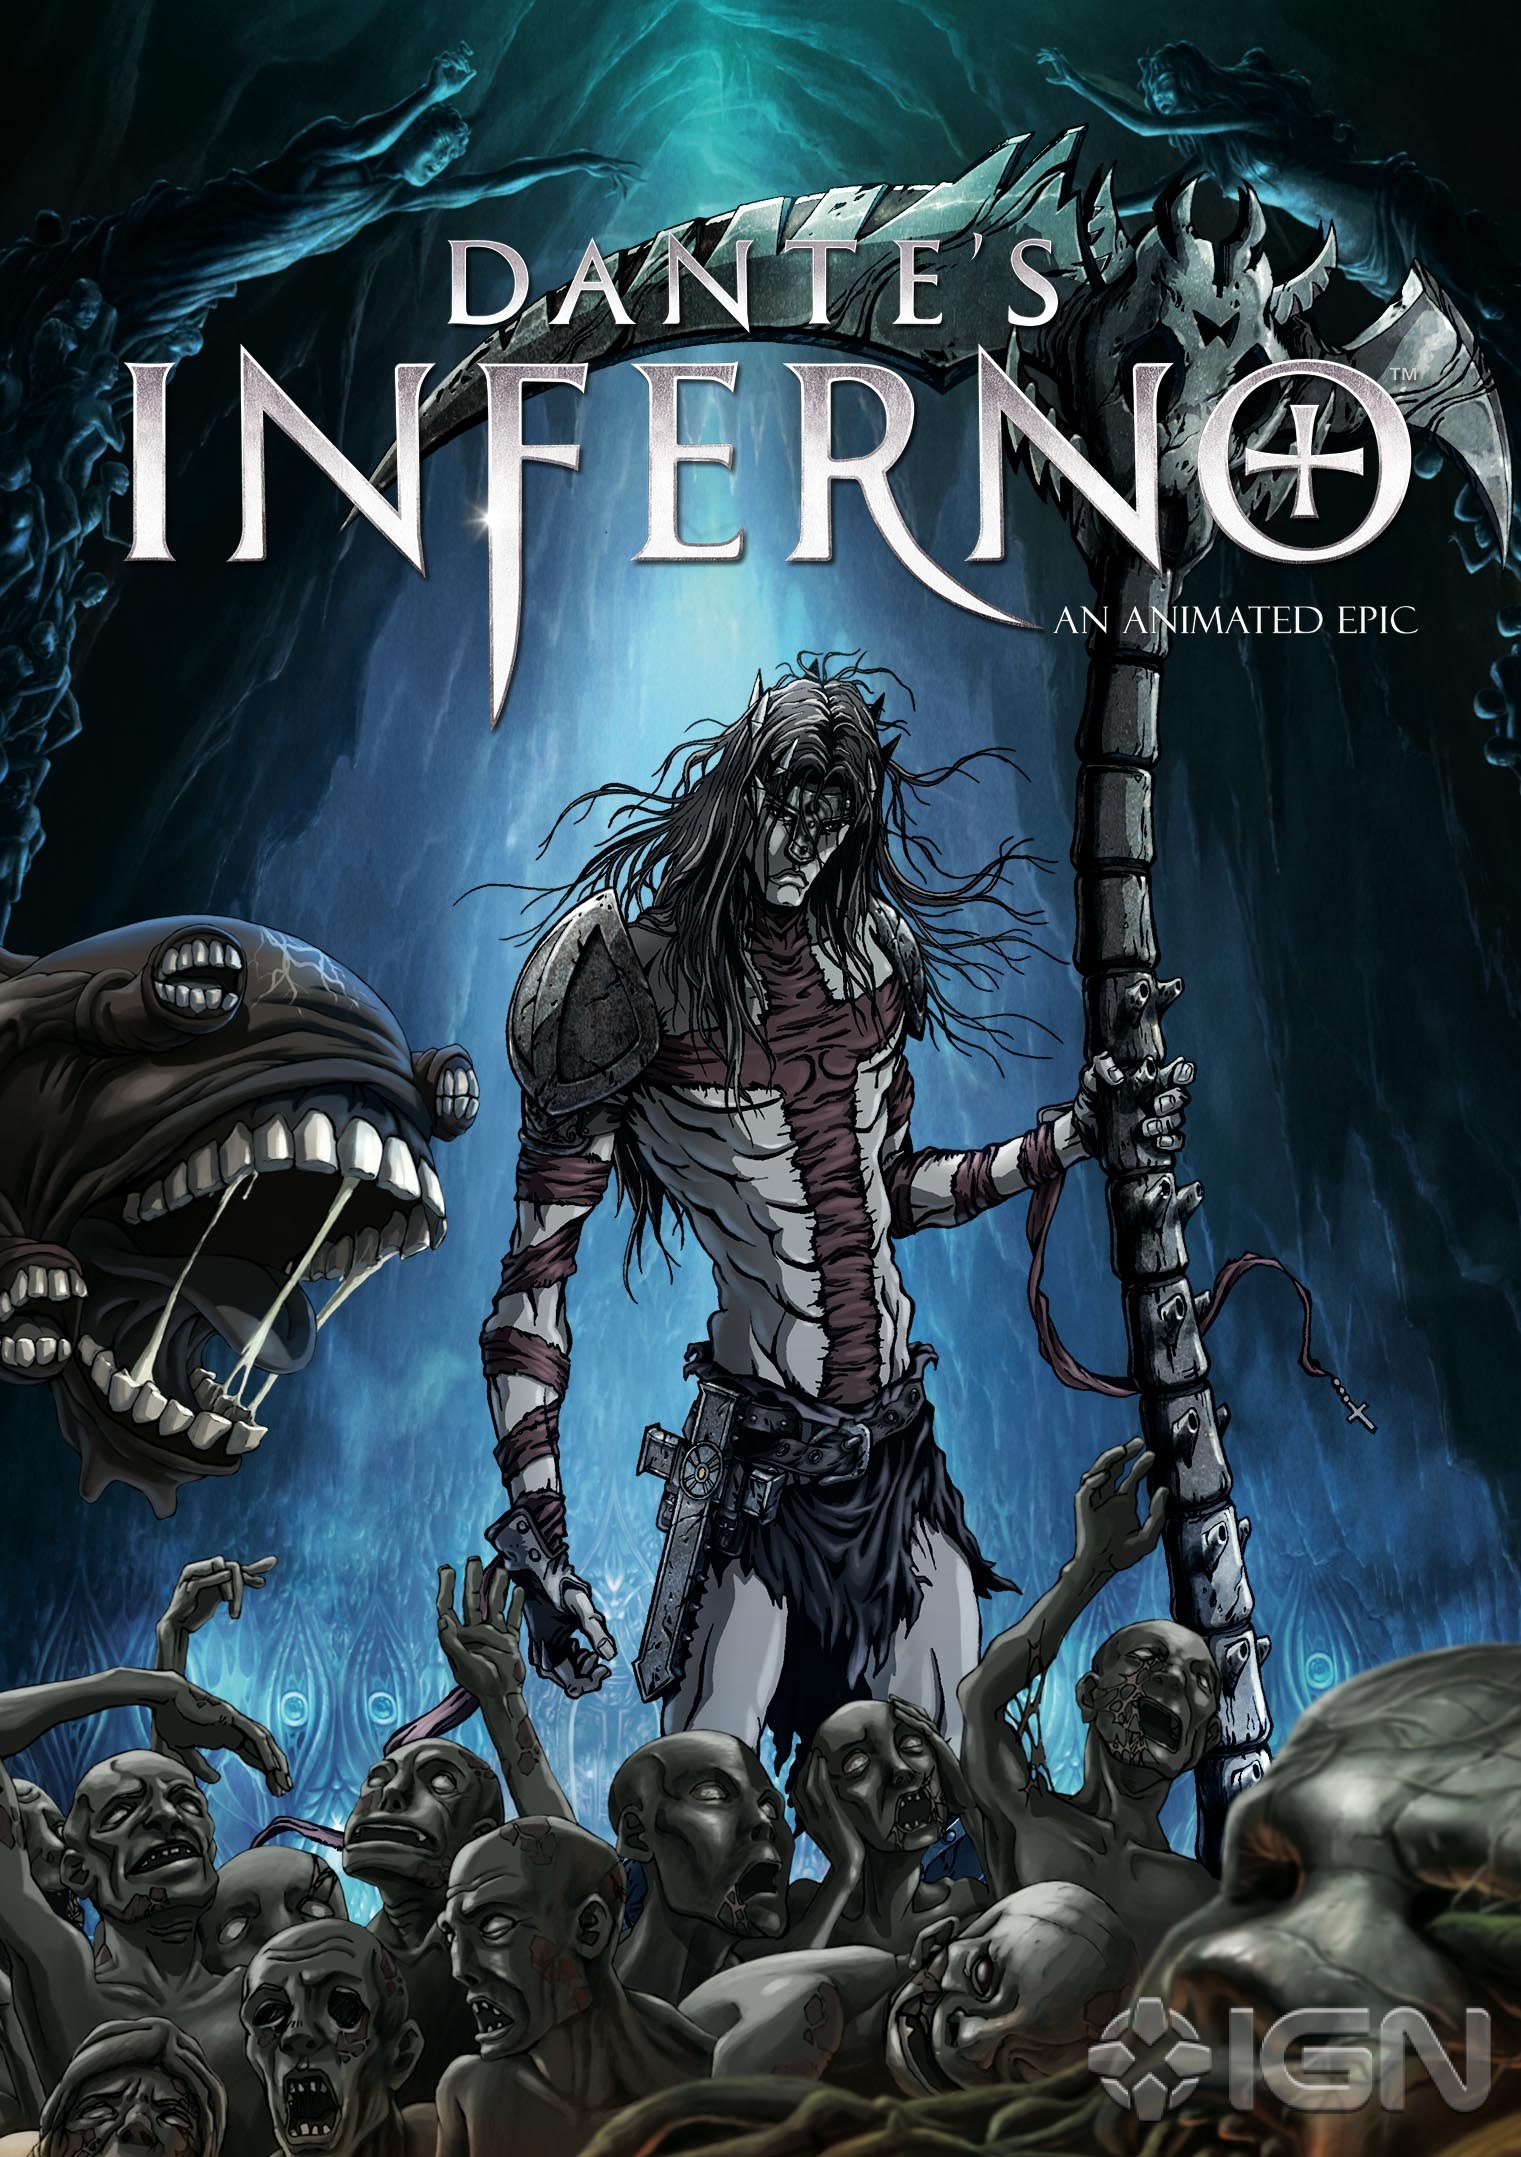 Dantes Inferno 2  Dantes inferno, Dante's inferno game, Epic of